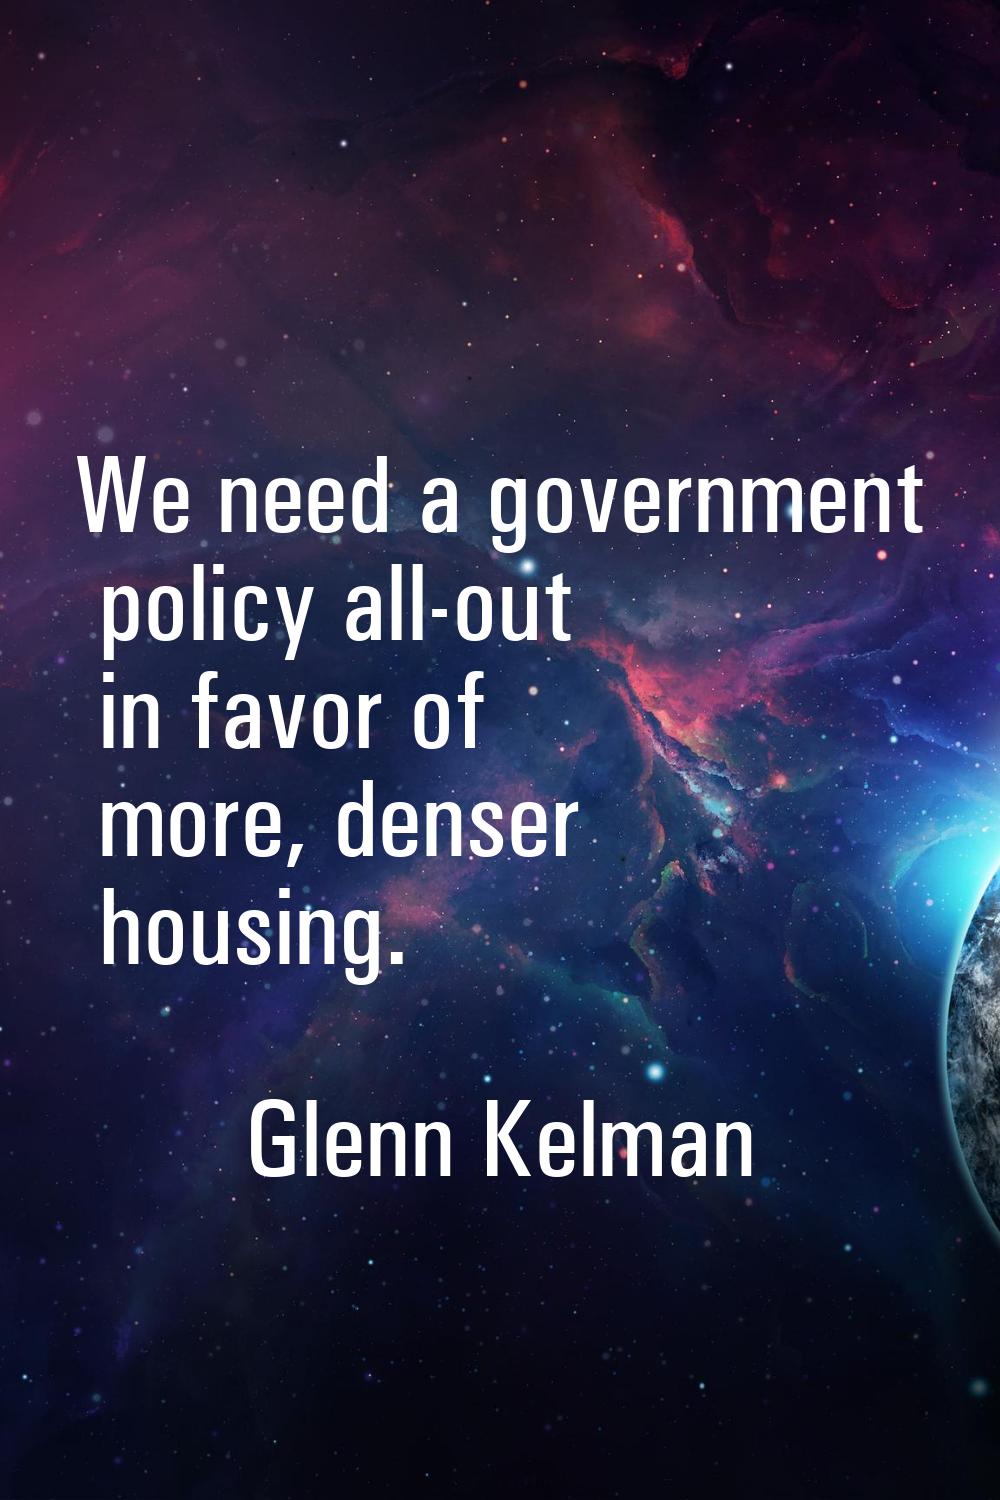 We need a government policy all-out in favor of more, denser housing.